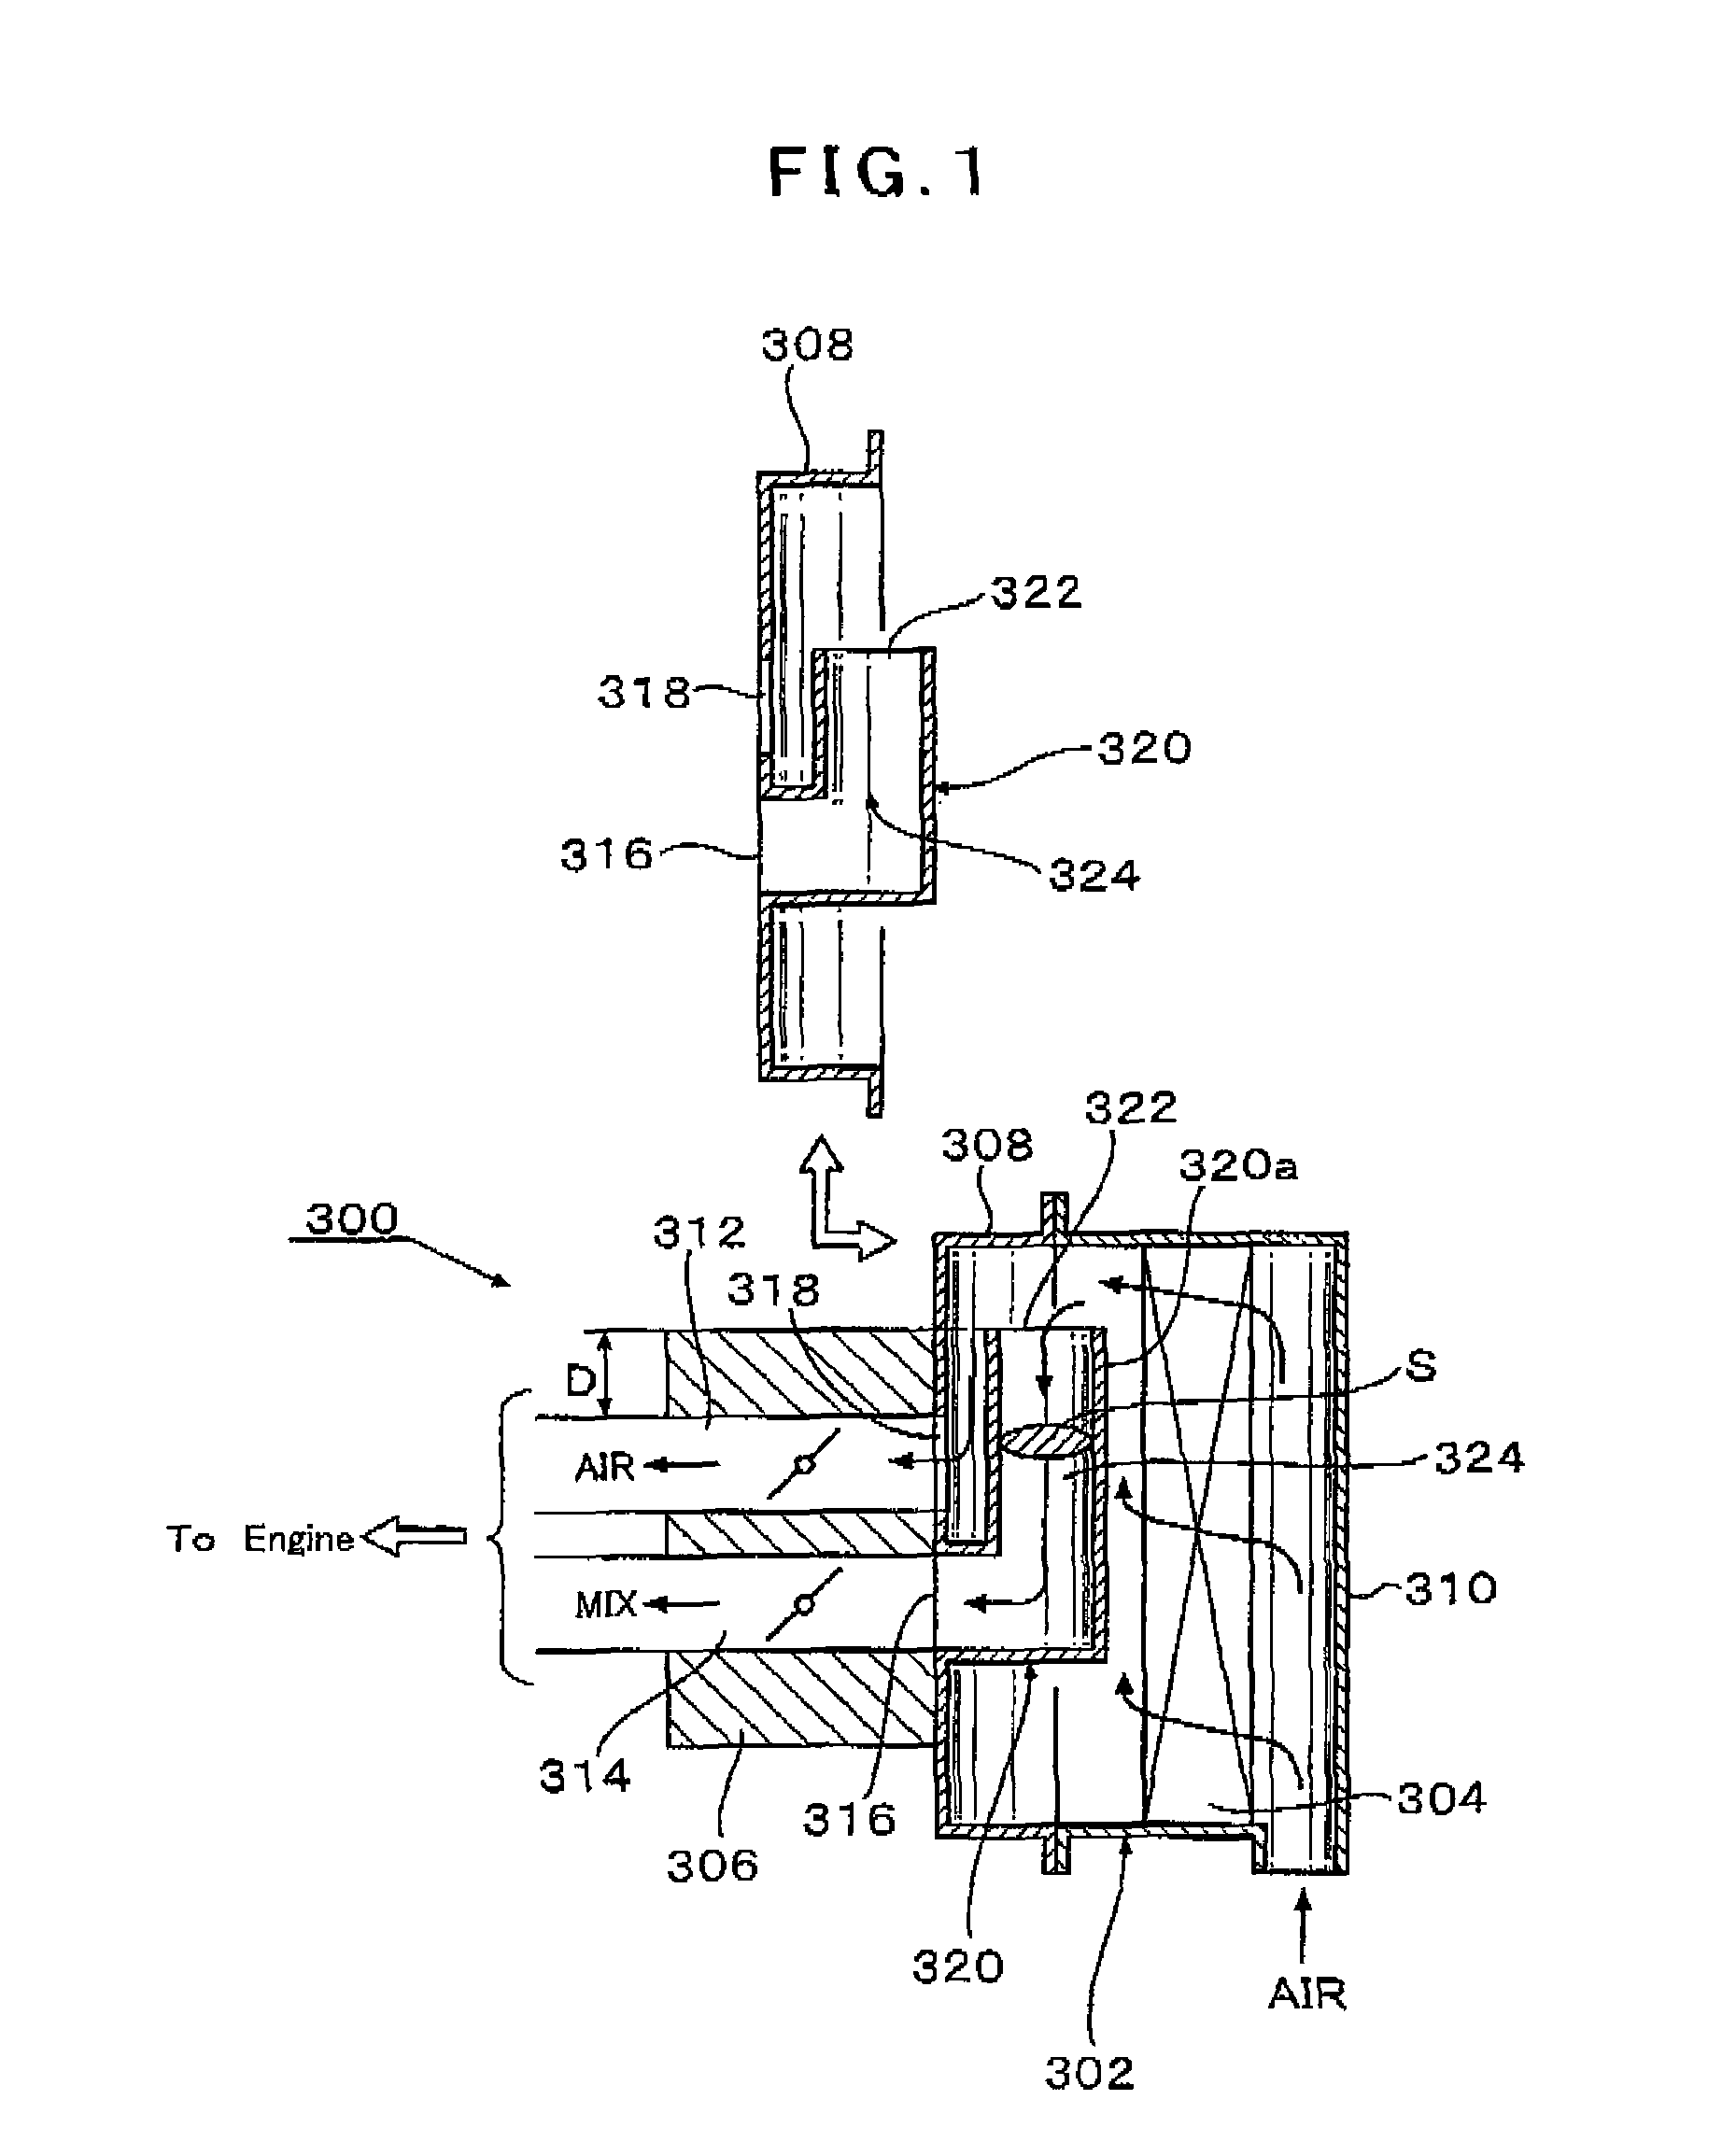 Air cleaner for two-stroke internal combustion engine and method of tuning the length of air-fuel mixture passage by using the air cleaner